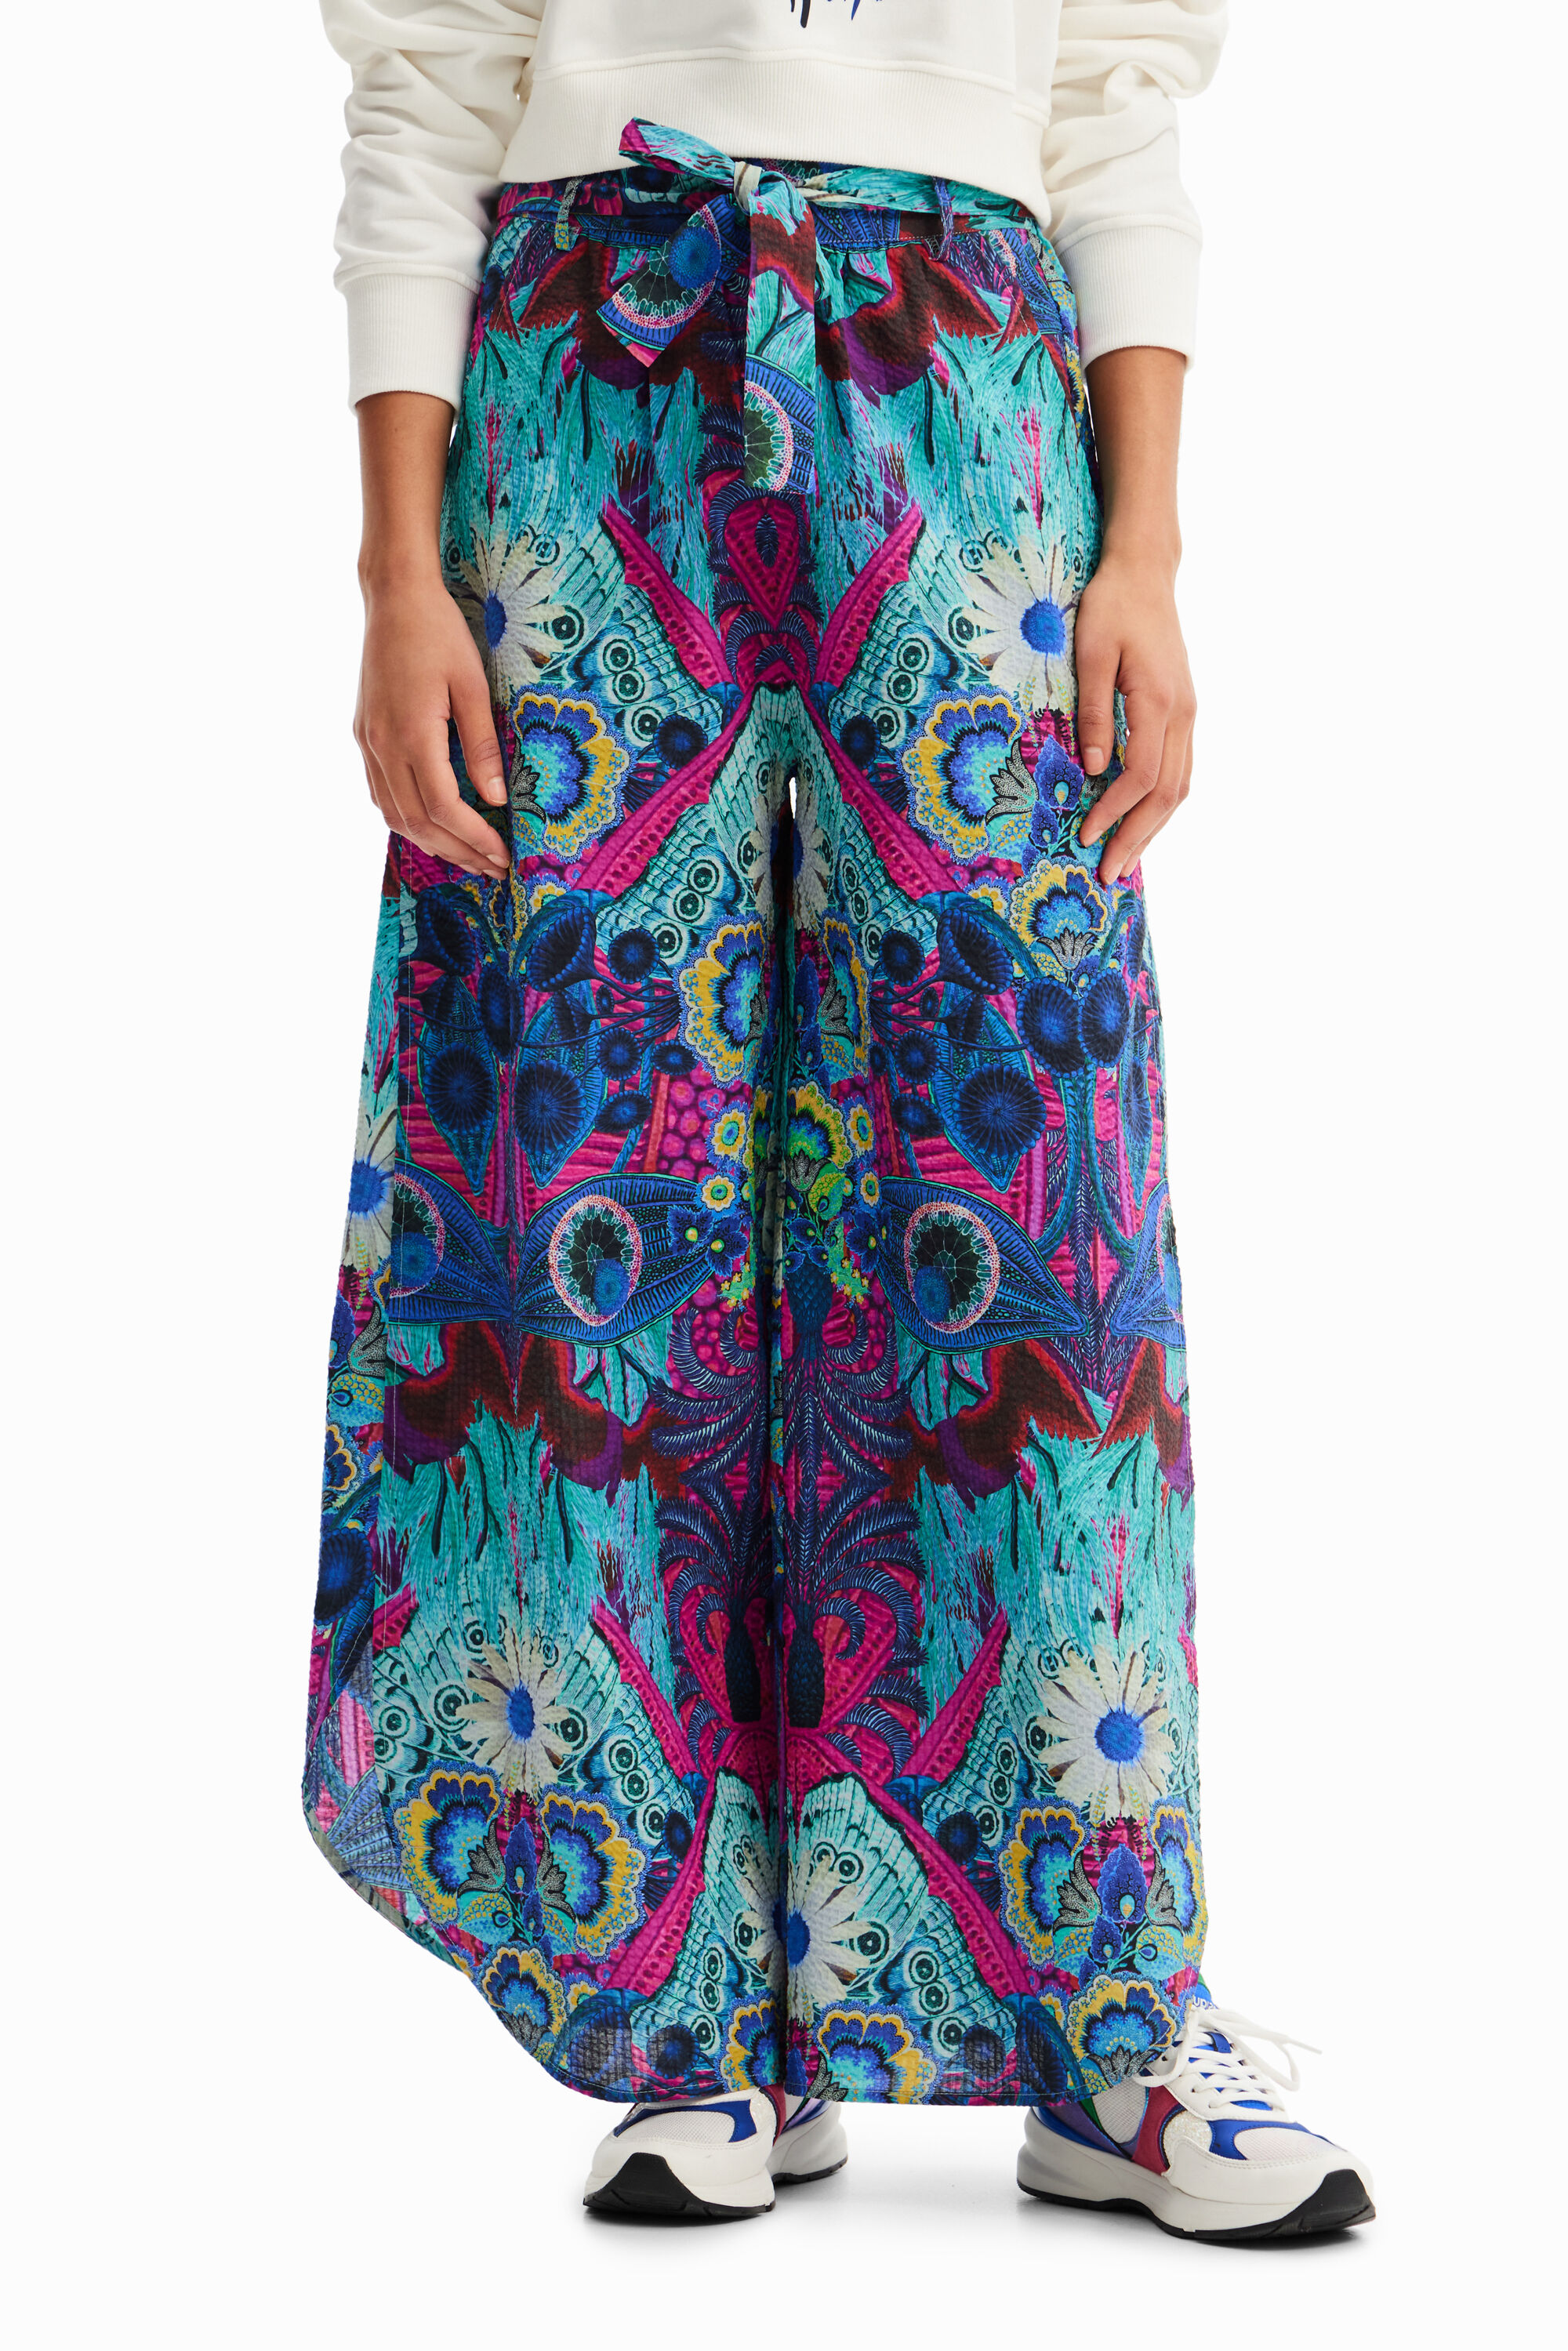 Twenty Dresses by Nykaa Fashion Bottoms Pants and Trousers  Buy Twenty  Dresses by Nykaa Fashion Blue Flare Up In Style Pants Online  Nykaa  Fashion